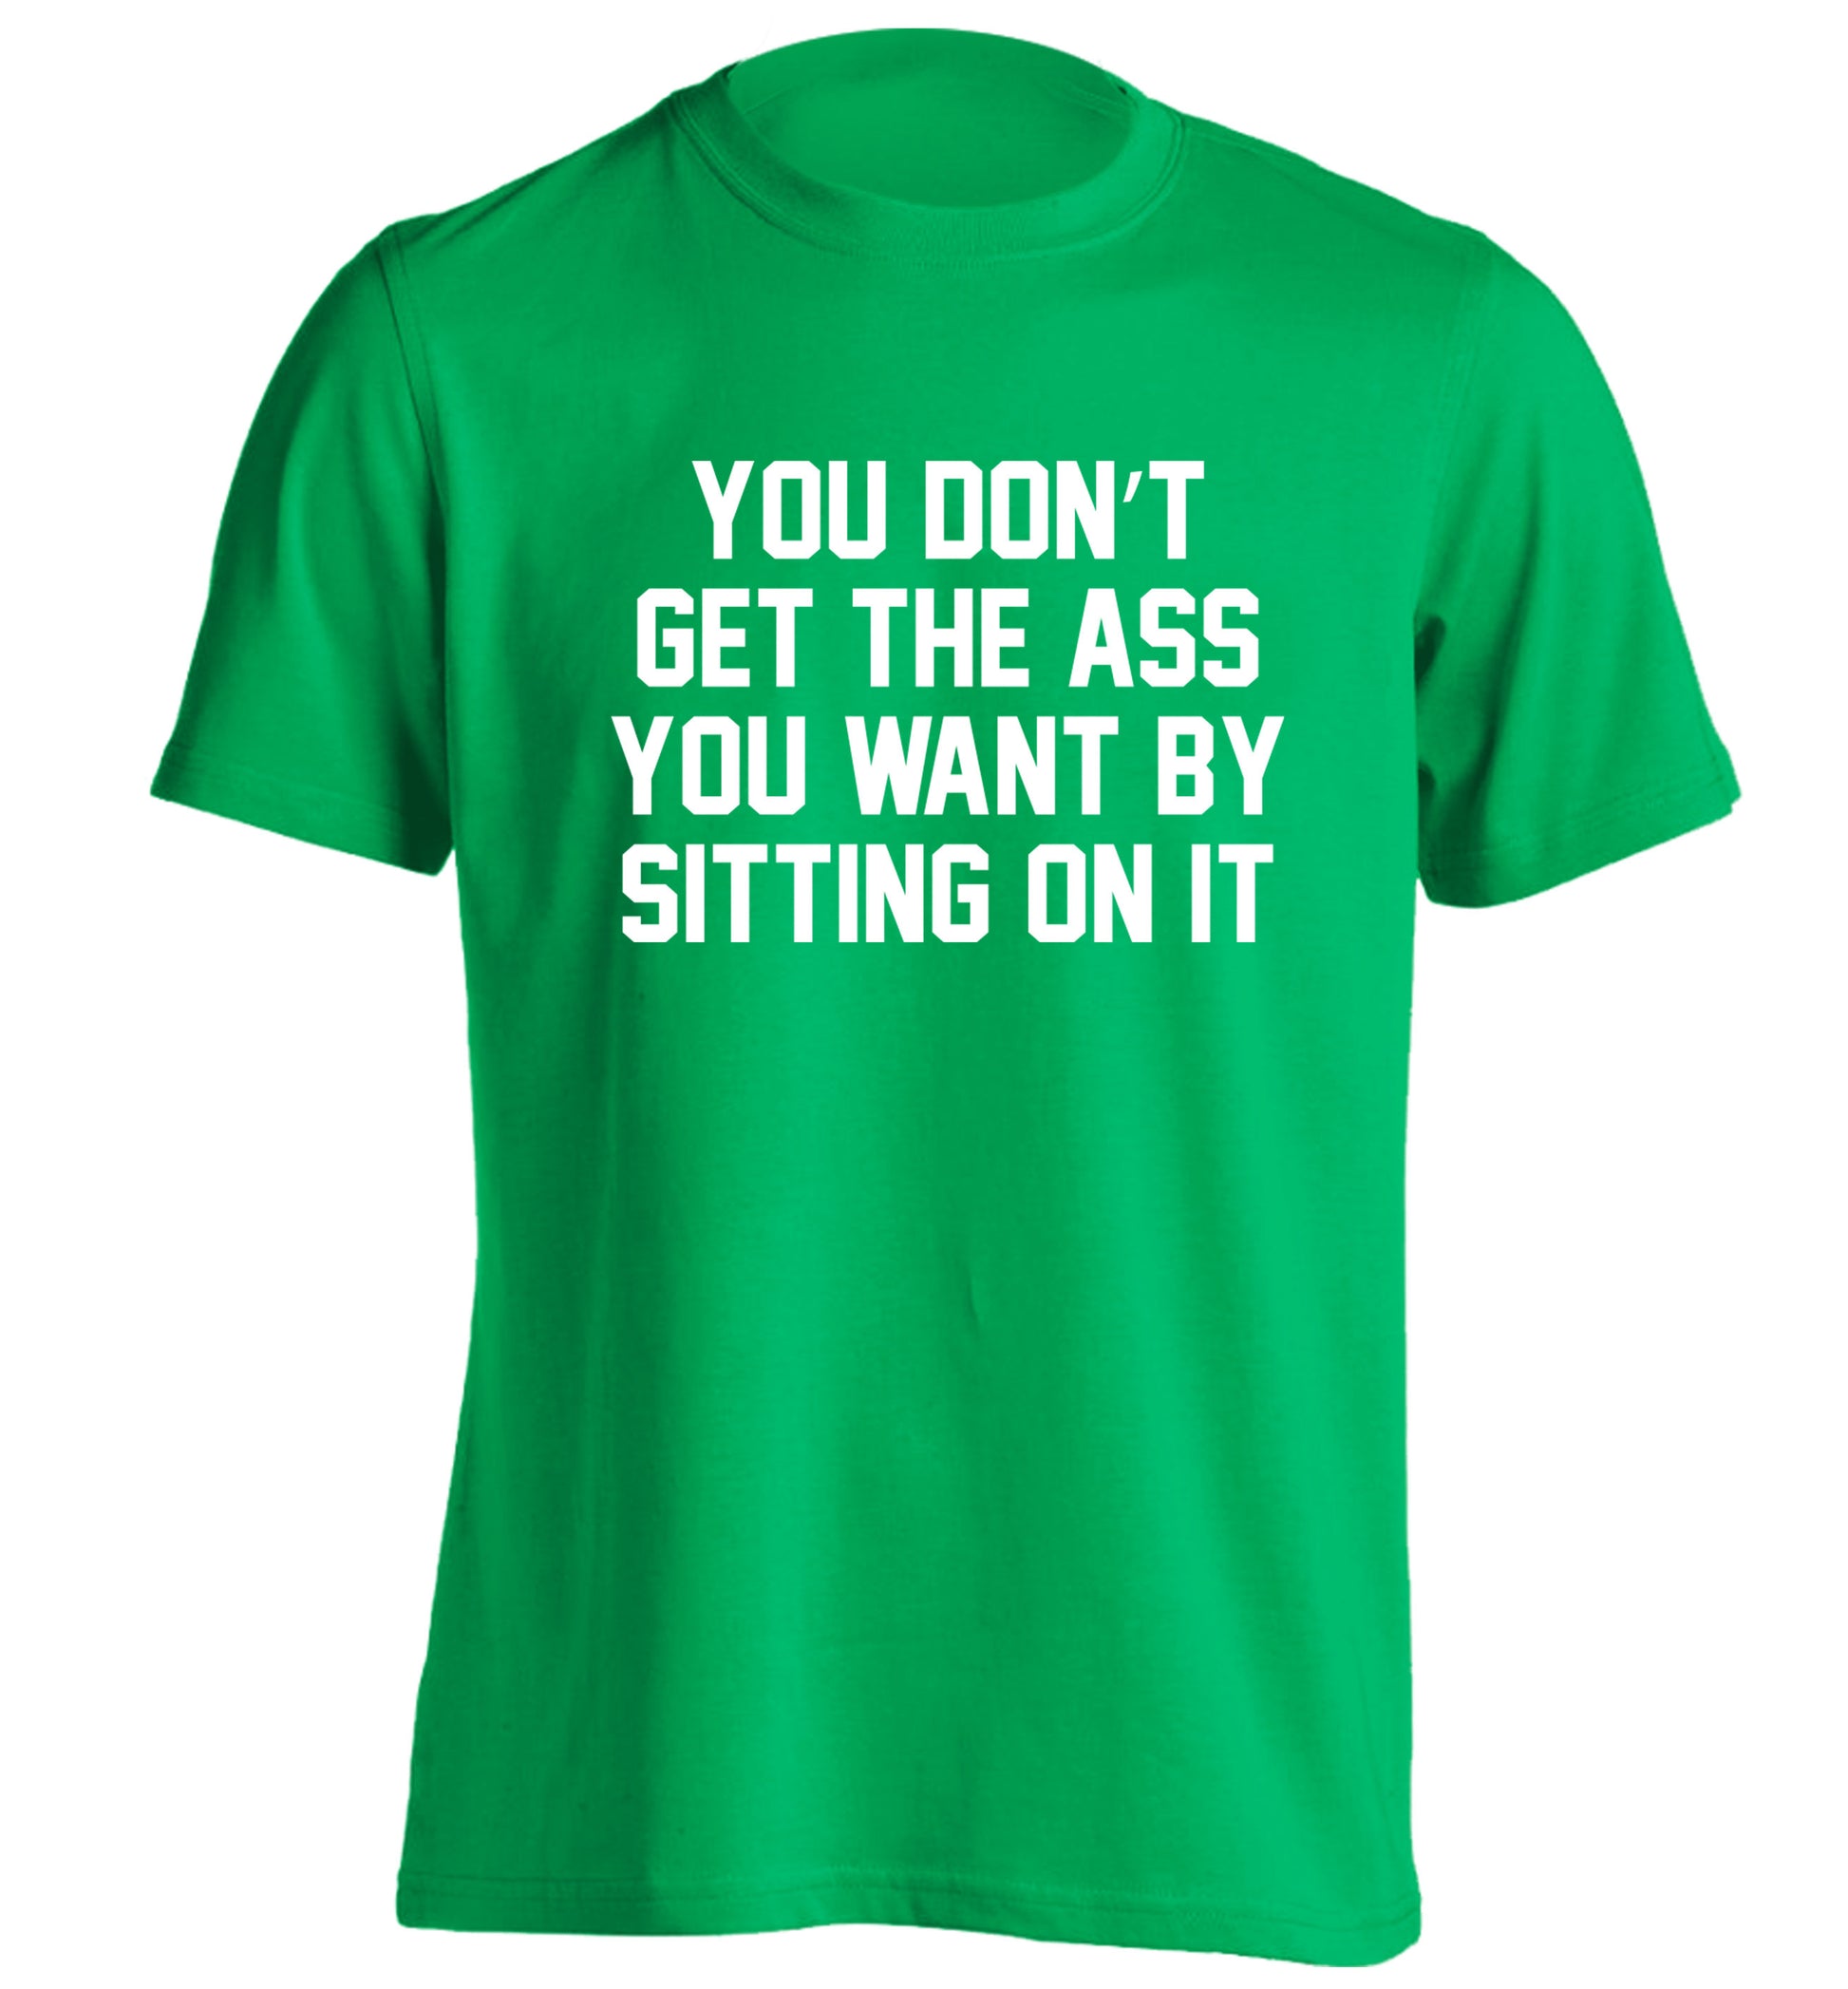 You don't get the ass you want by sitting on it adults unisex green Tshirt 2XL